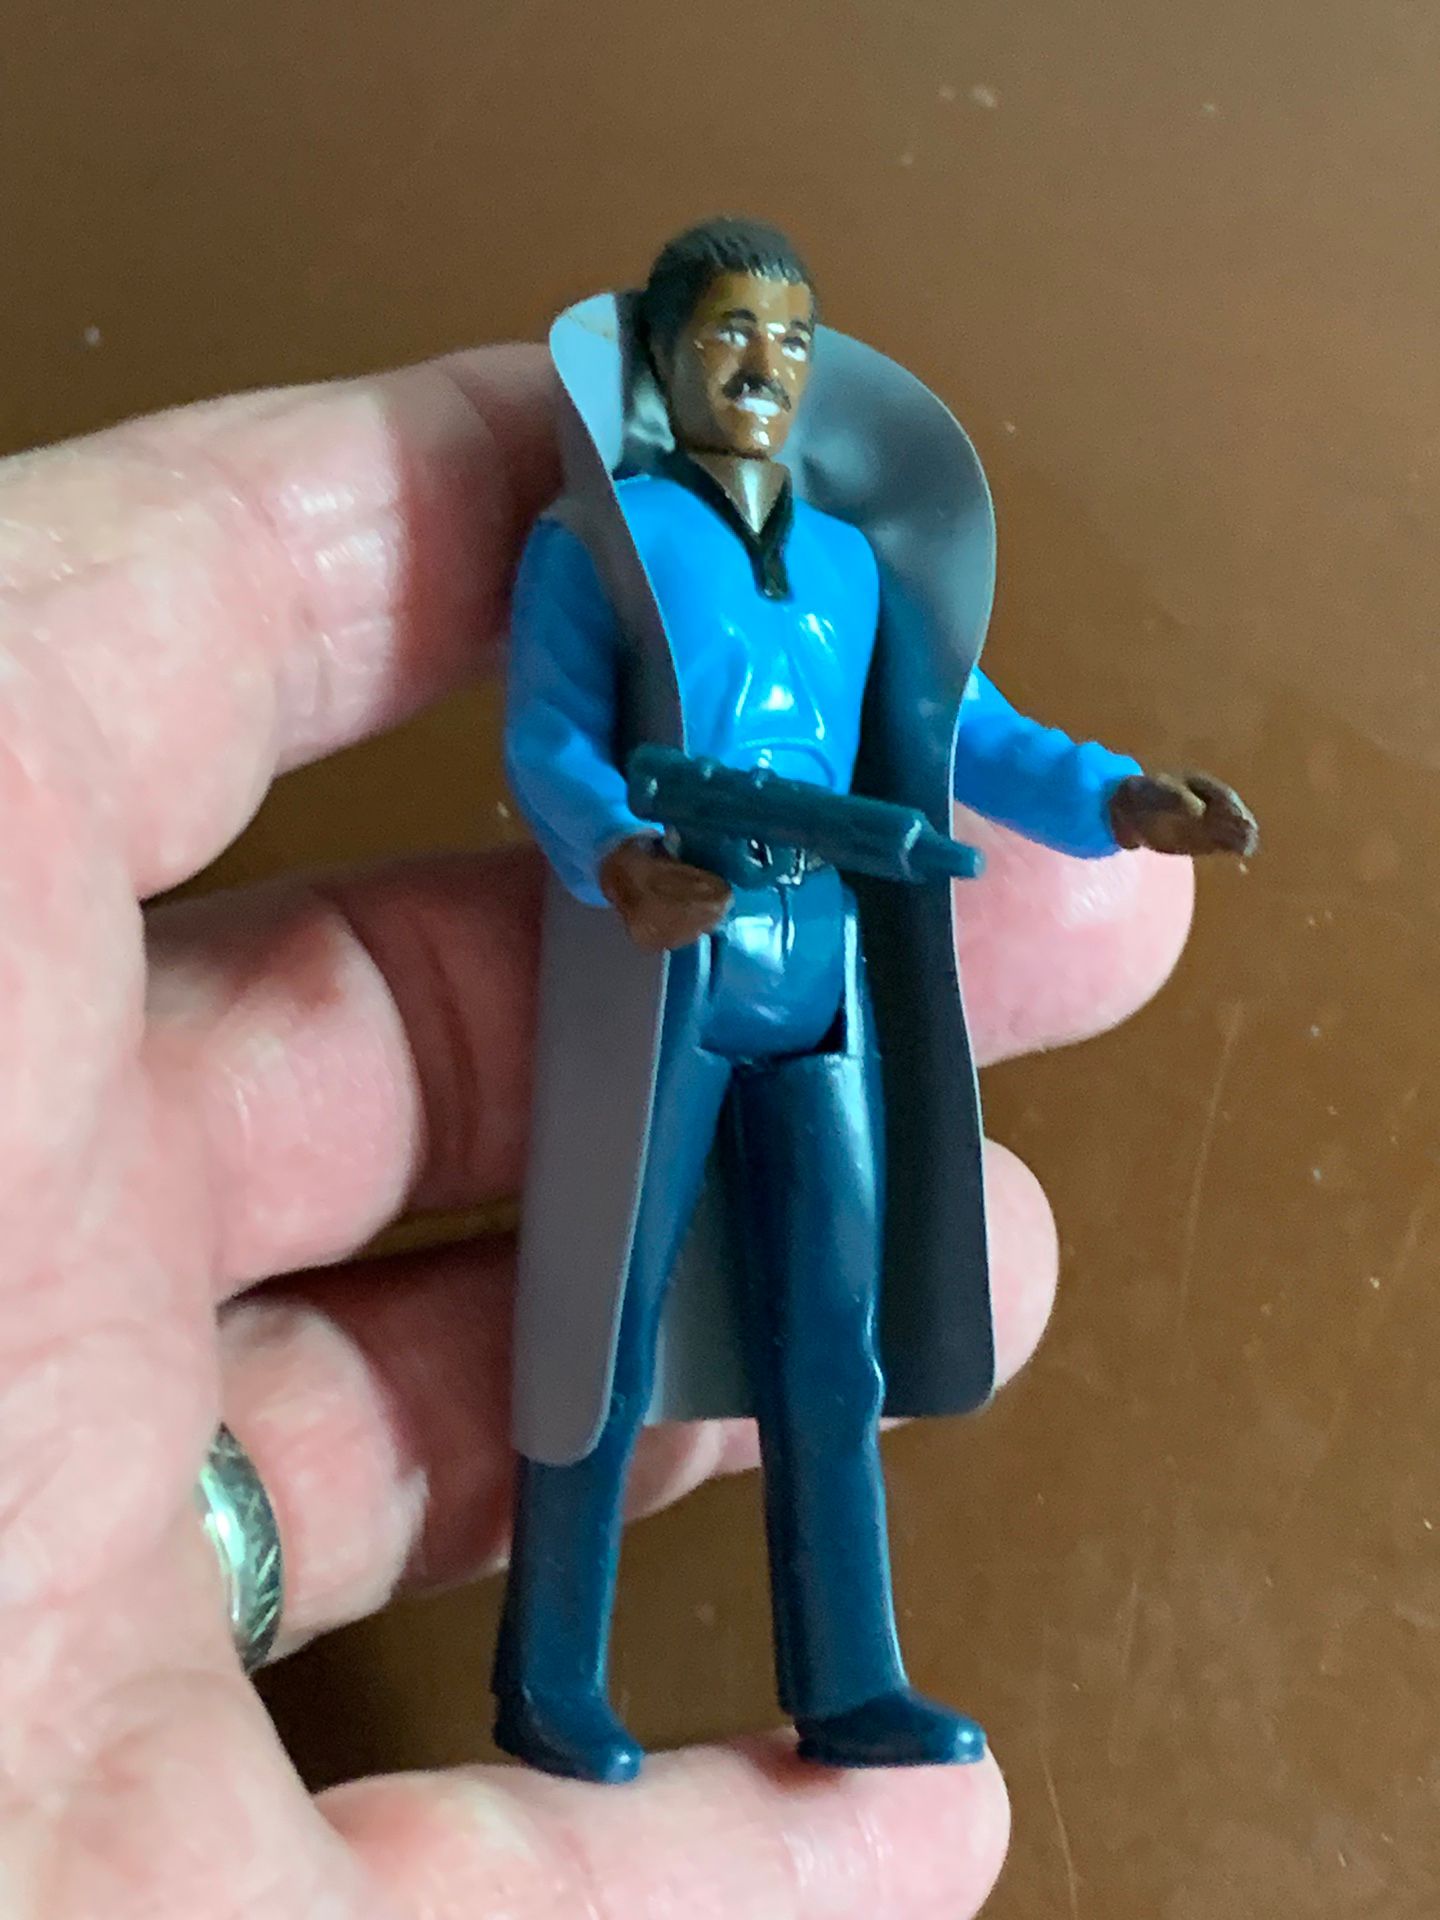 STAR WARS “LANDO CAIRISSIAN” from 1980 with WEAPON &CAPE-Complete Set